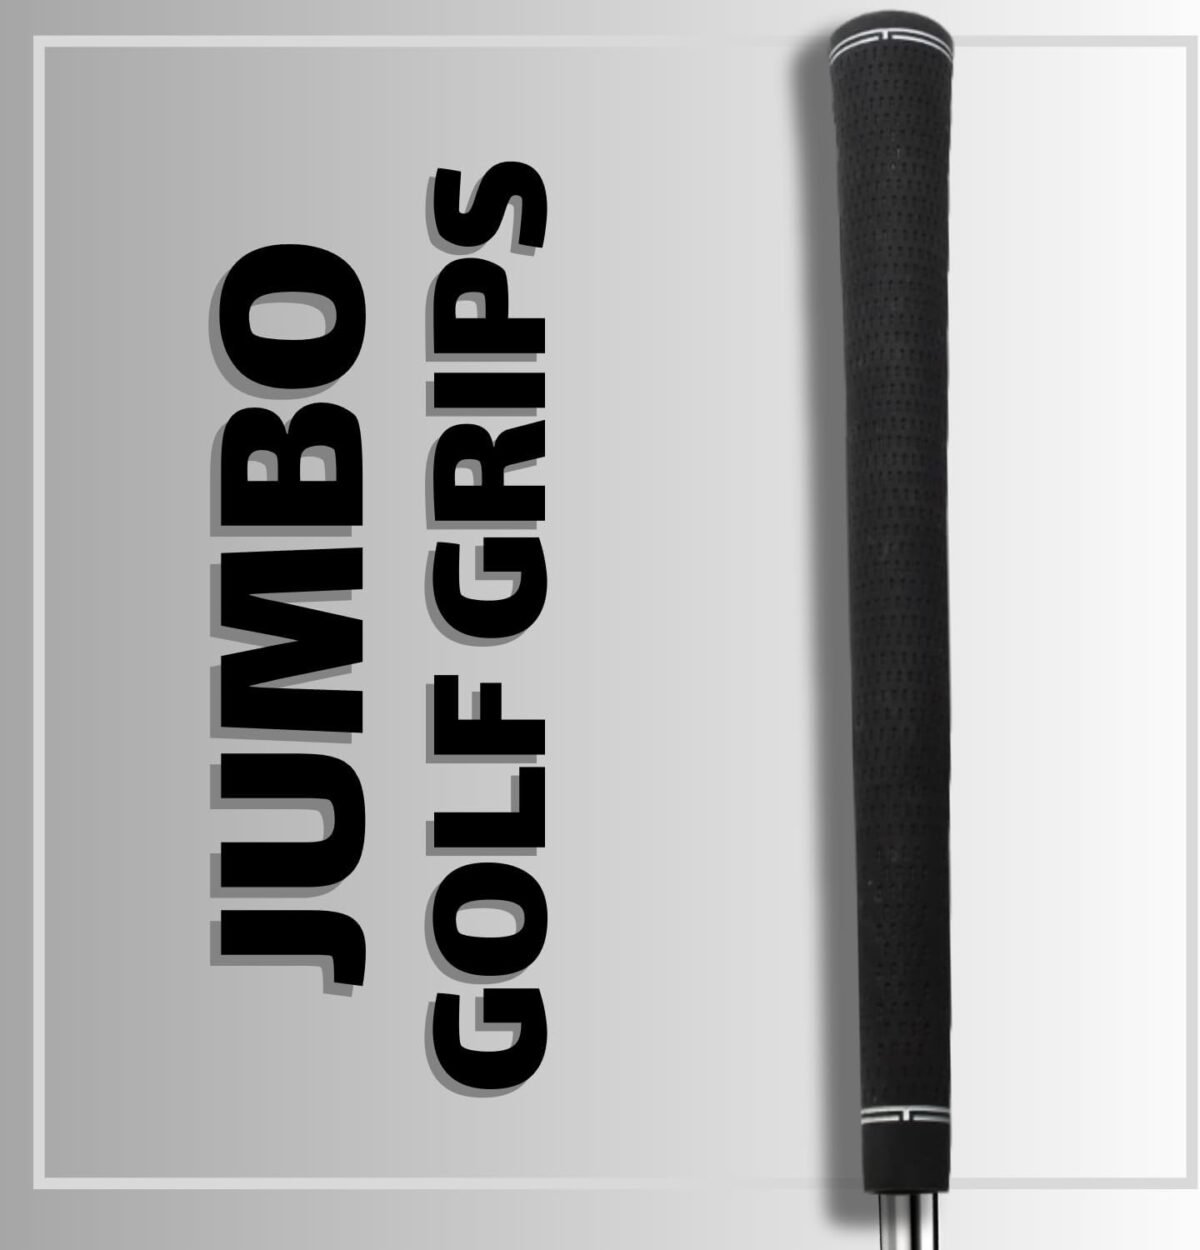 Comparing 4 Golf Grips: Oversize, Arthritic, Soft, and All-Weather